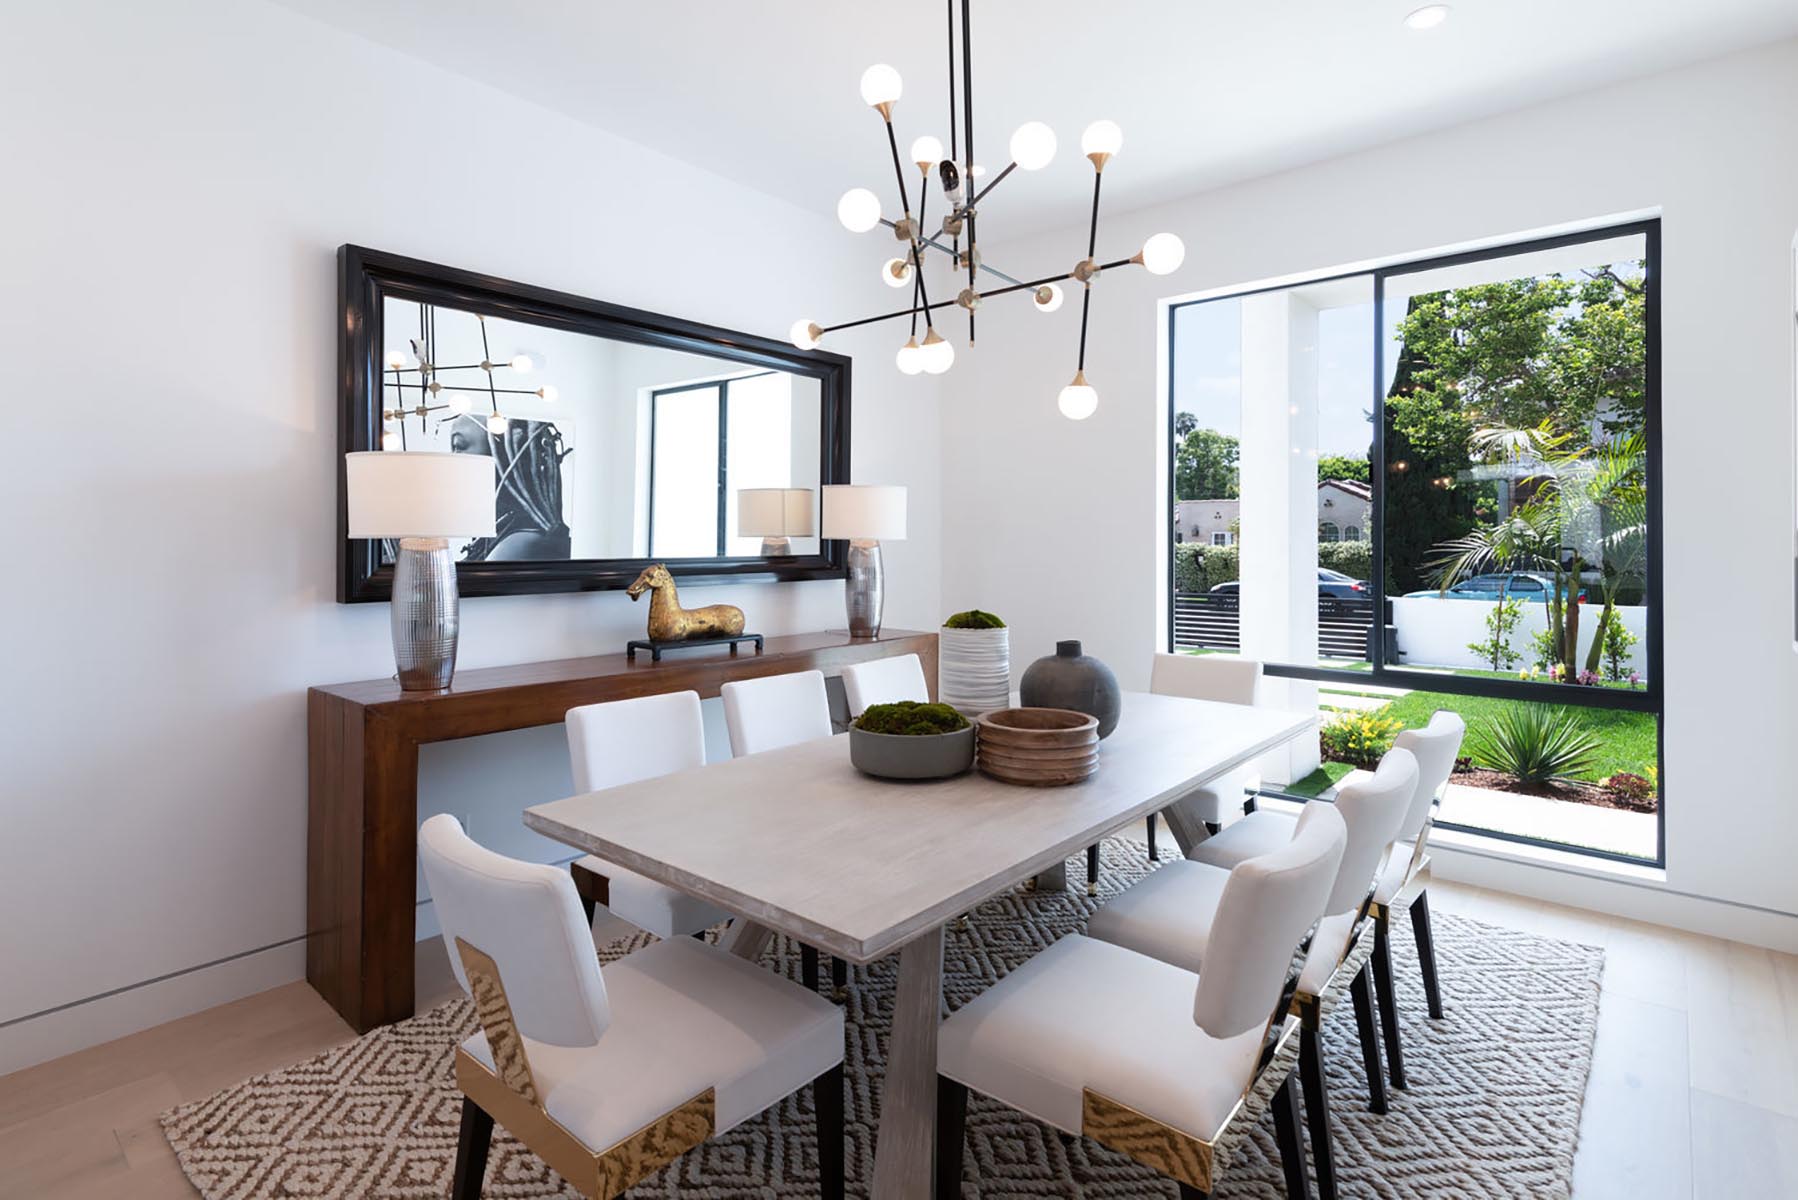 Home design Los Angeles modern contemporary dining area 2 